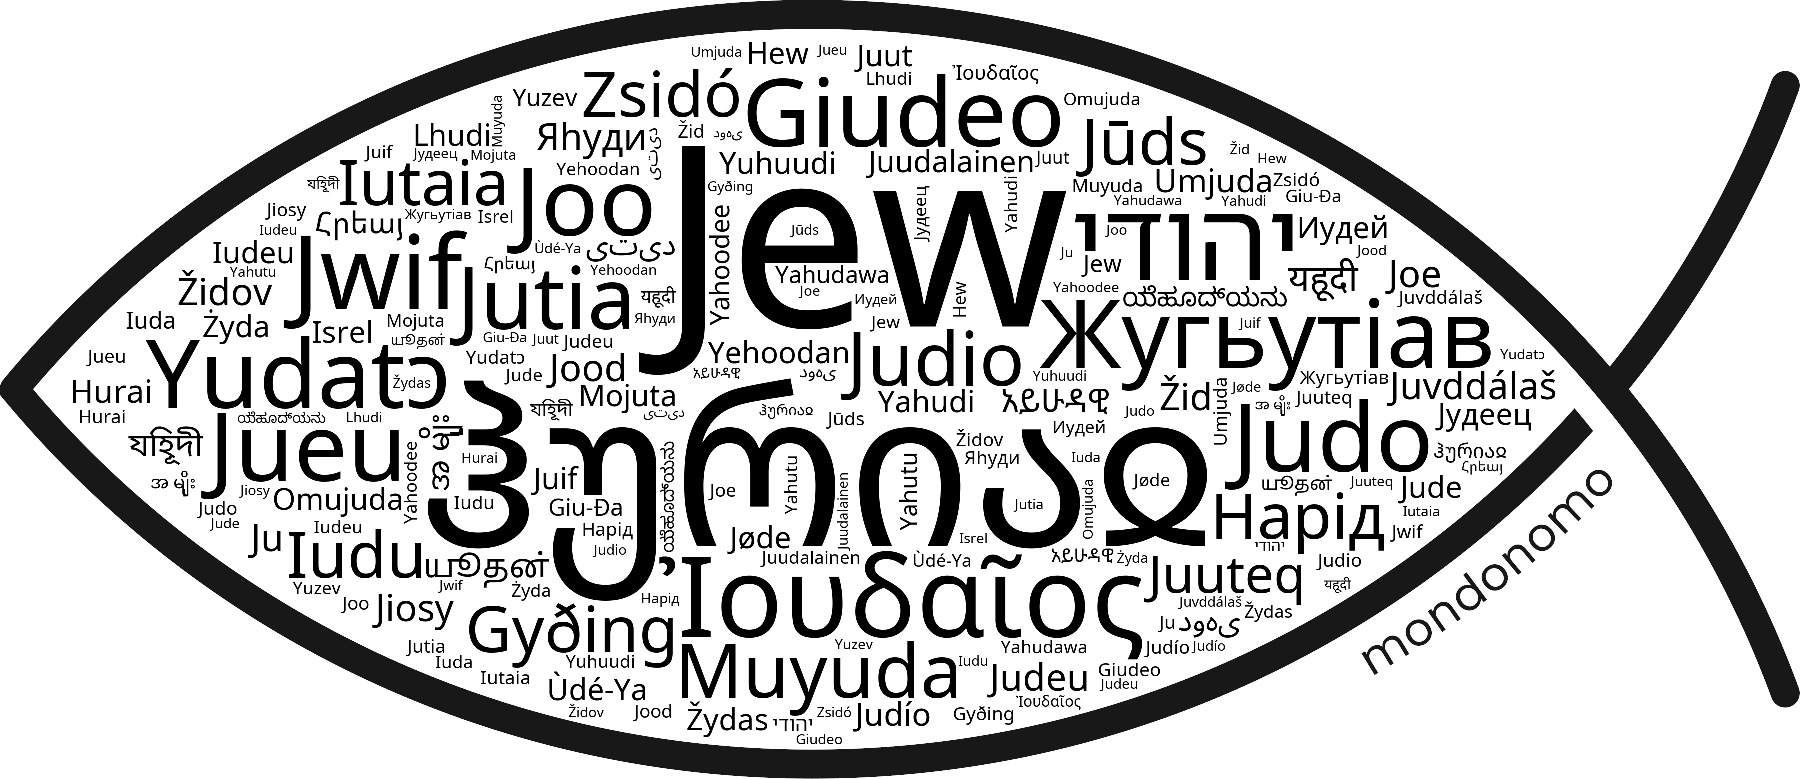 Name Jew in the world's Bibles